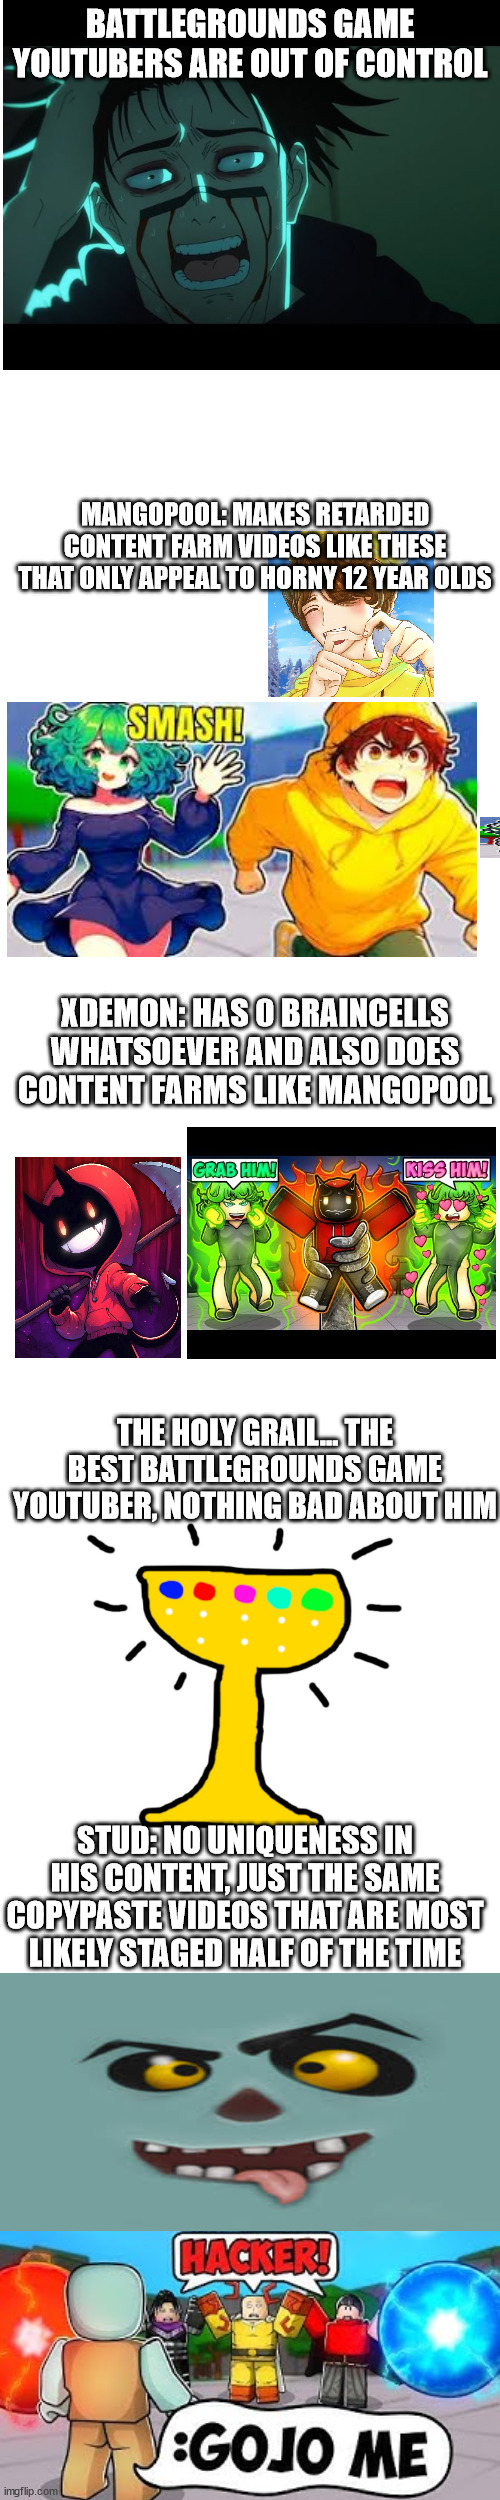 i am so sick of this crap | BATTLEGROUNDS GAME YOUTUBERS ARE OUT OF CONTROL; MANGOPOOL: MAKES RETARDED CONTENT FARM VIDEOS LIKE THESE THAT ONLY APPEAL TO HORNY 12 YEAR OLDS; XDEMON: HAS 0 BRAINCELLS WHATSOEVER AND ALSO DOES CONTENT FARMS LIKE MANGOPOOL; THE HOLY GRAIL... THE BEST BATTLEGROUNDS GAME YOUTUBER, NOTHING BAD ABOUT HIM; STUD: NO UNIQUENESS IN HIS CONTENT, JUST THE SAME COPYPASTE VIDEOS THAT ARE MOST LIKELY STAGED HALF OF THE TIME | image tagged in roblox,so tired,gen alpha,stupid people | made w/ Imgflip meme maker